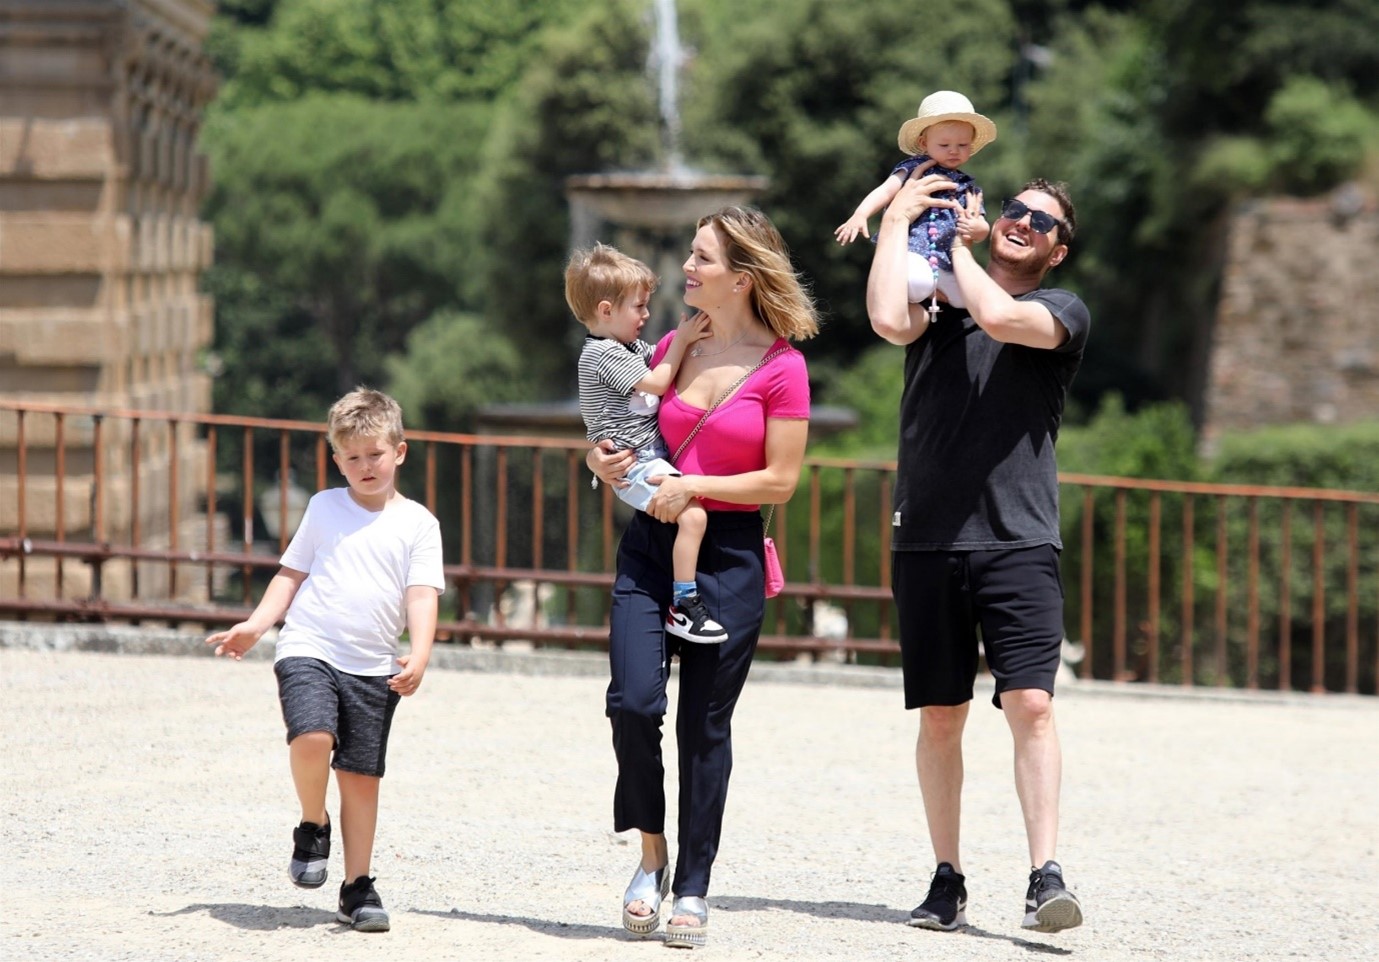 Michael Bublé Wife: The family enjoy time together.